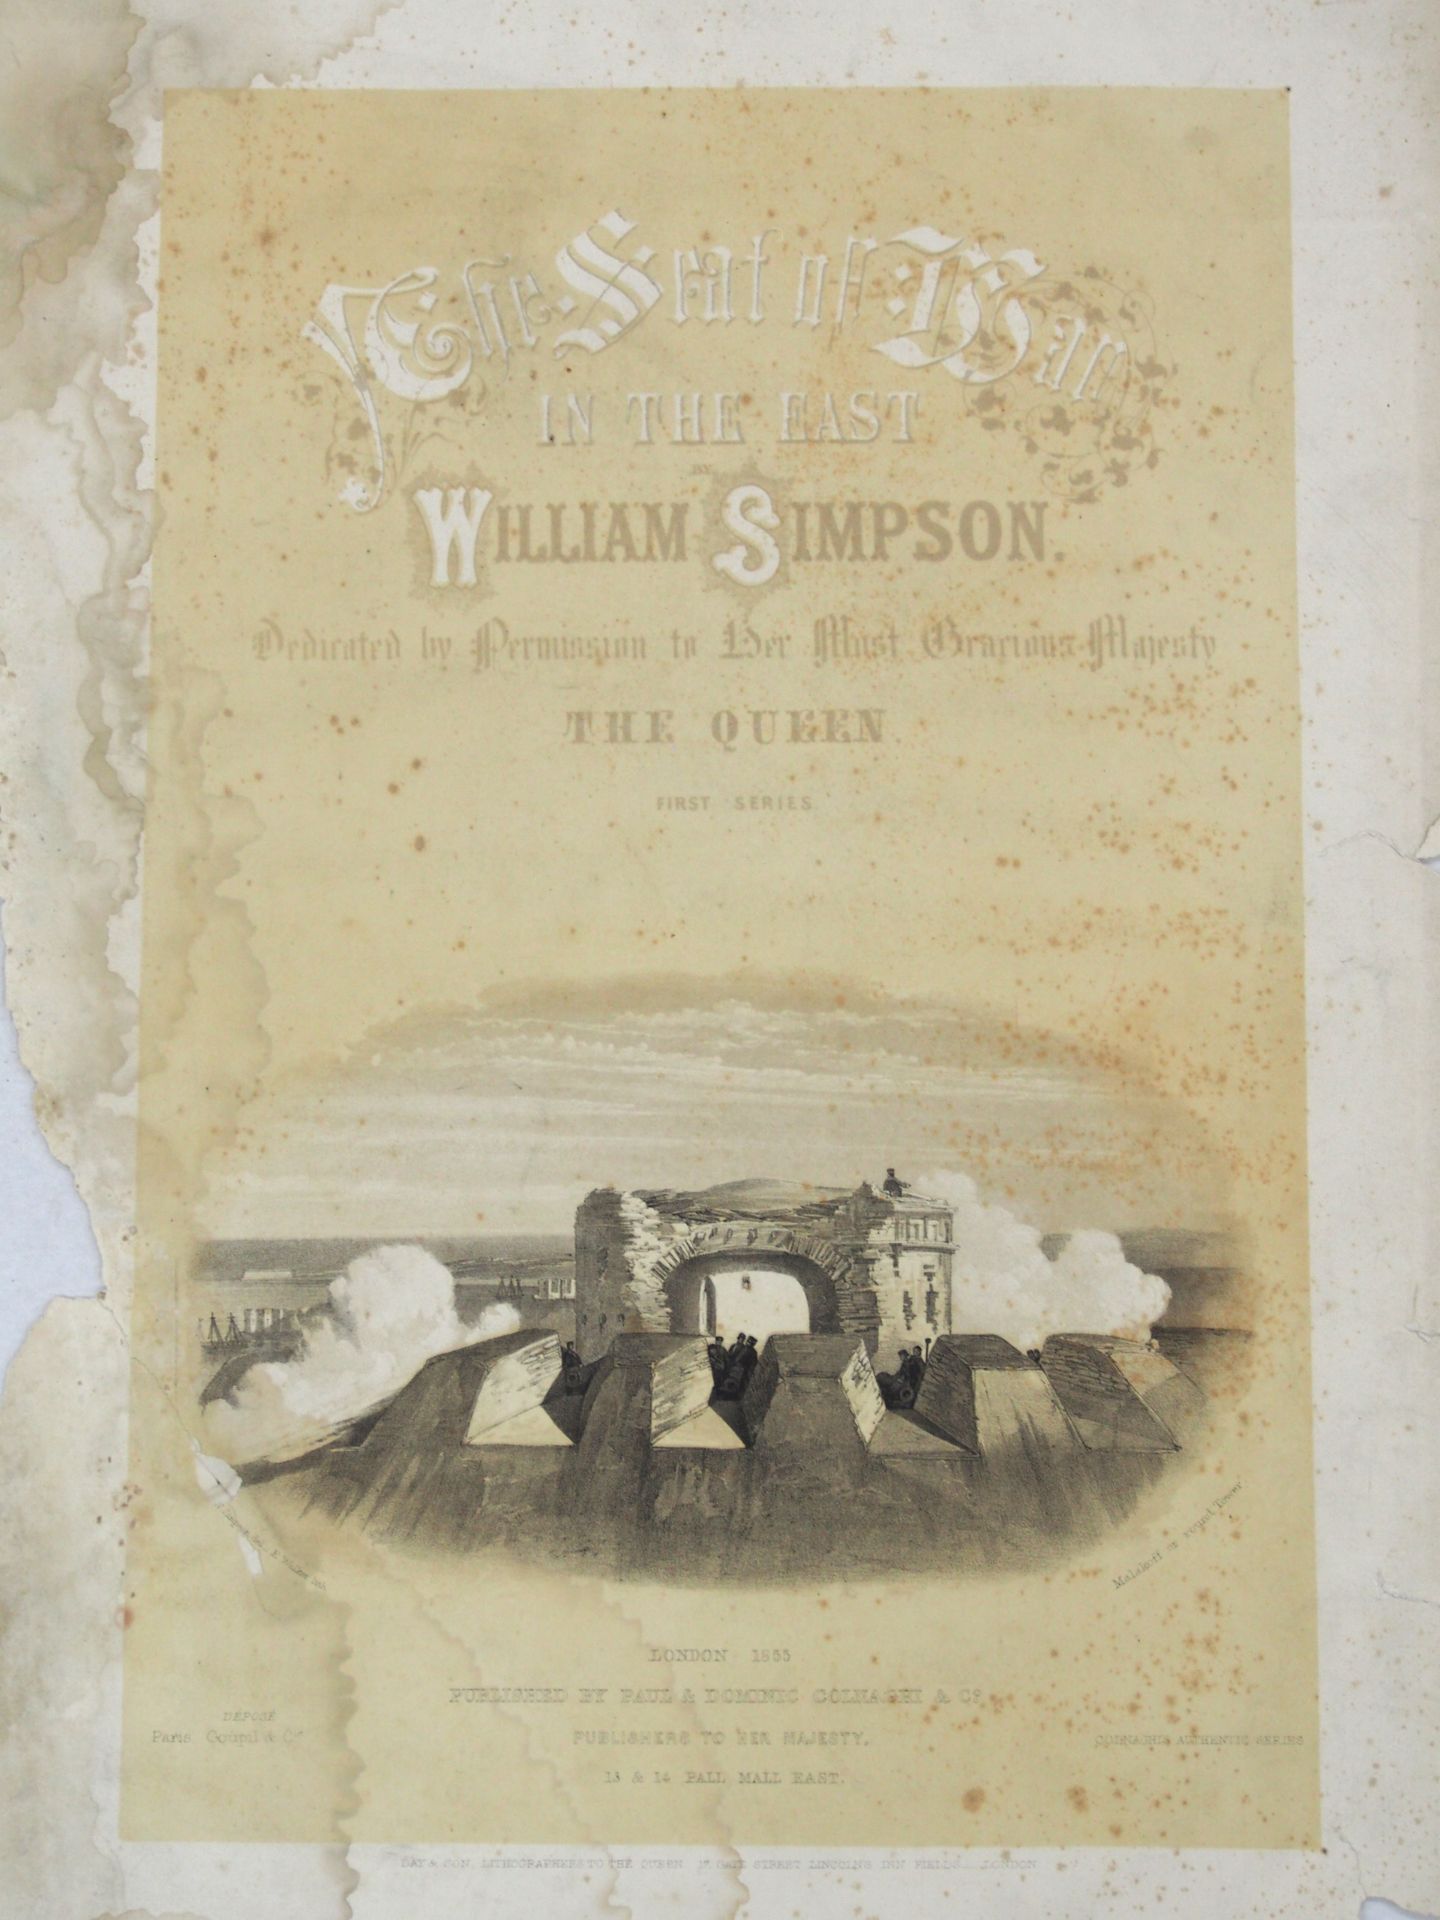 SIMPSON, William: The Seat of War in the East -I - Image 2 of 2